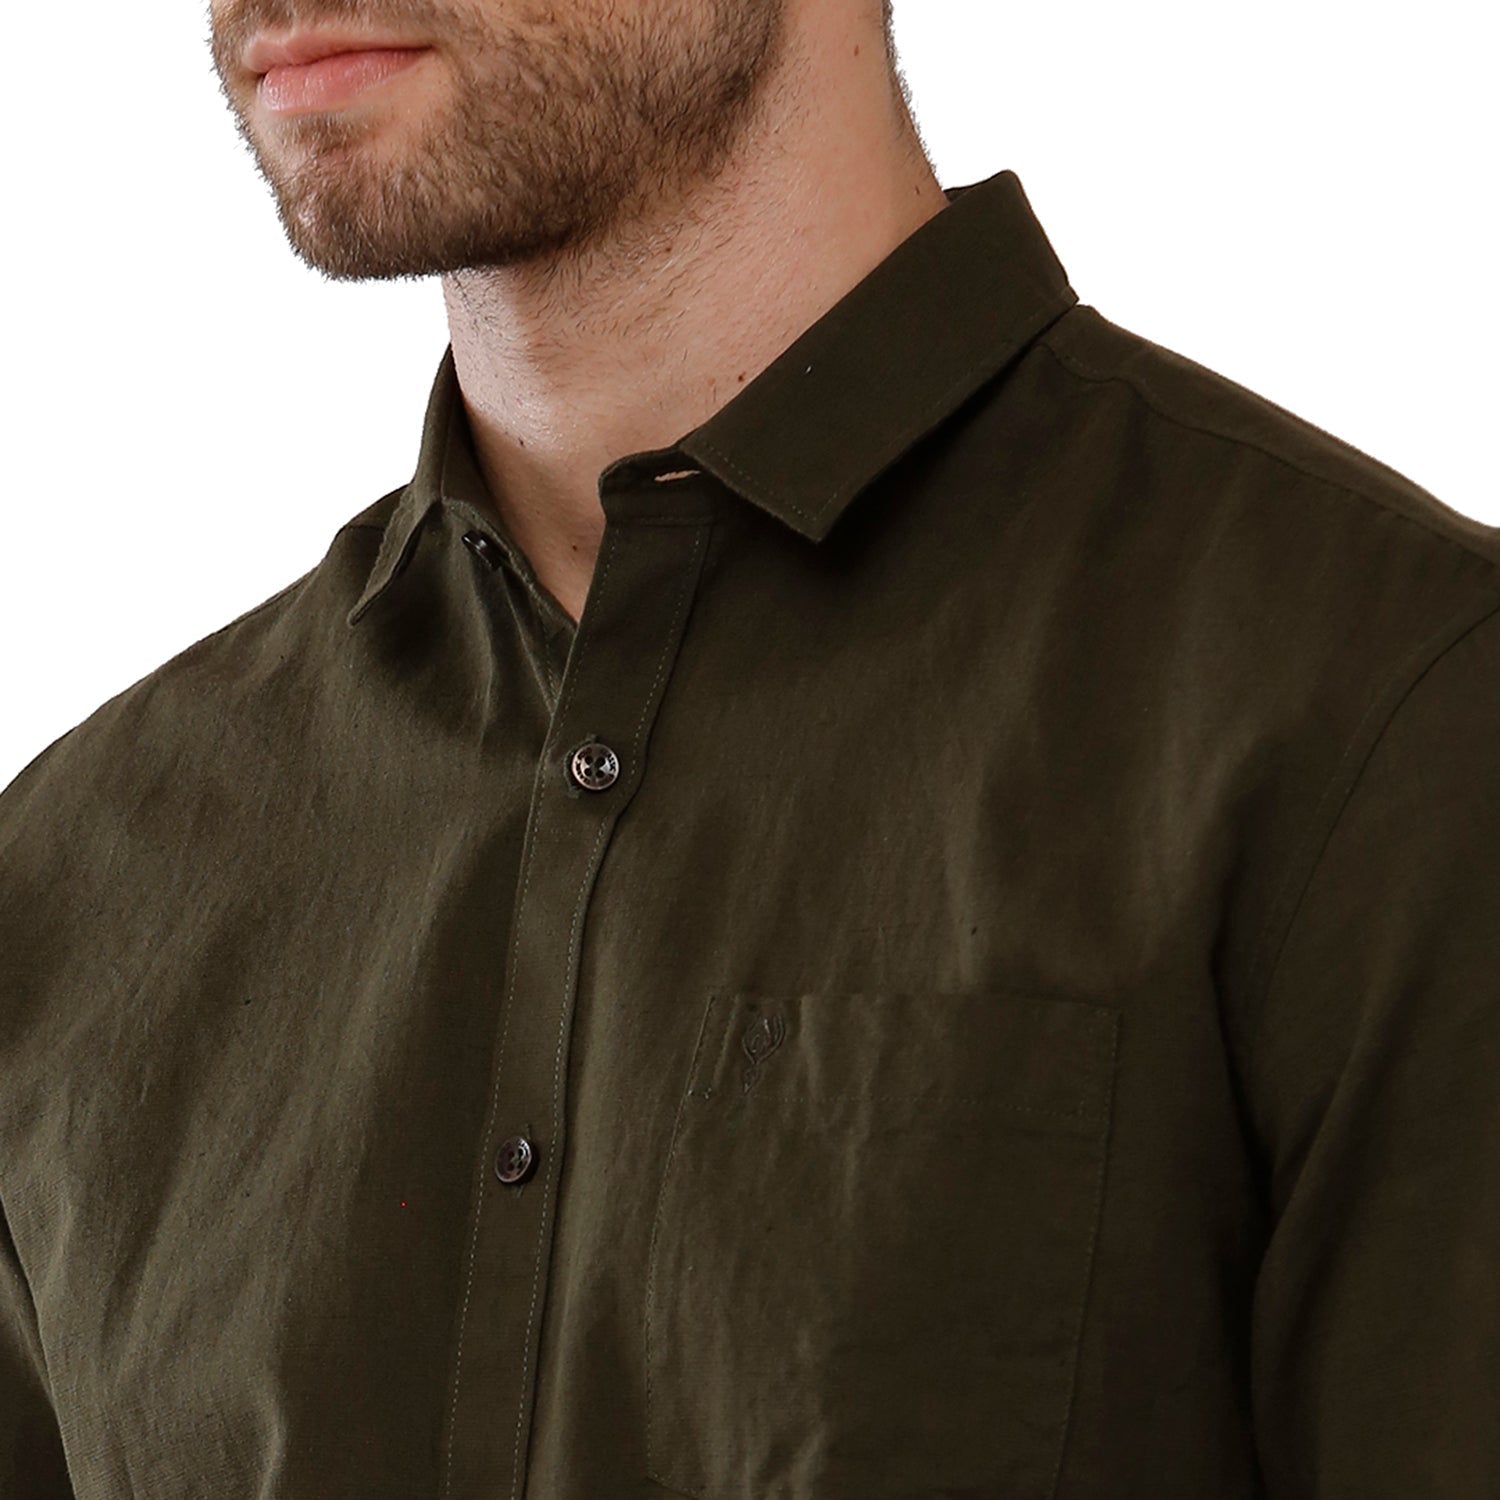 Classic Polo Mens 100% Cotton Solid Milano Fit Olive Green Color Woven Shirt - Mica Olive Shirts Classic Polo 